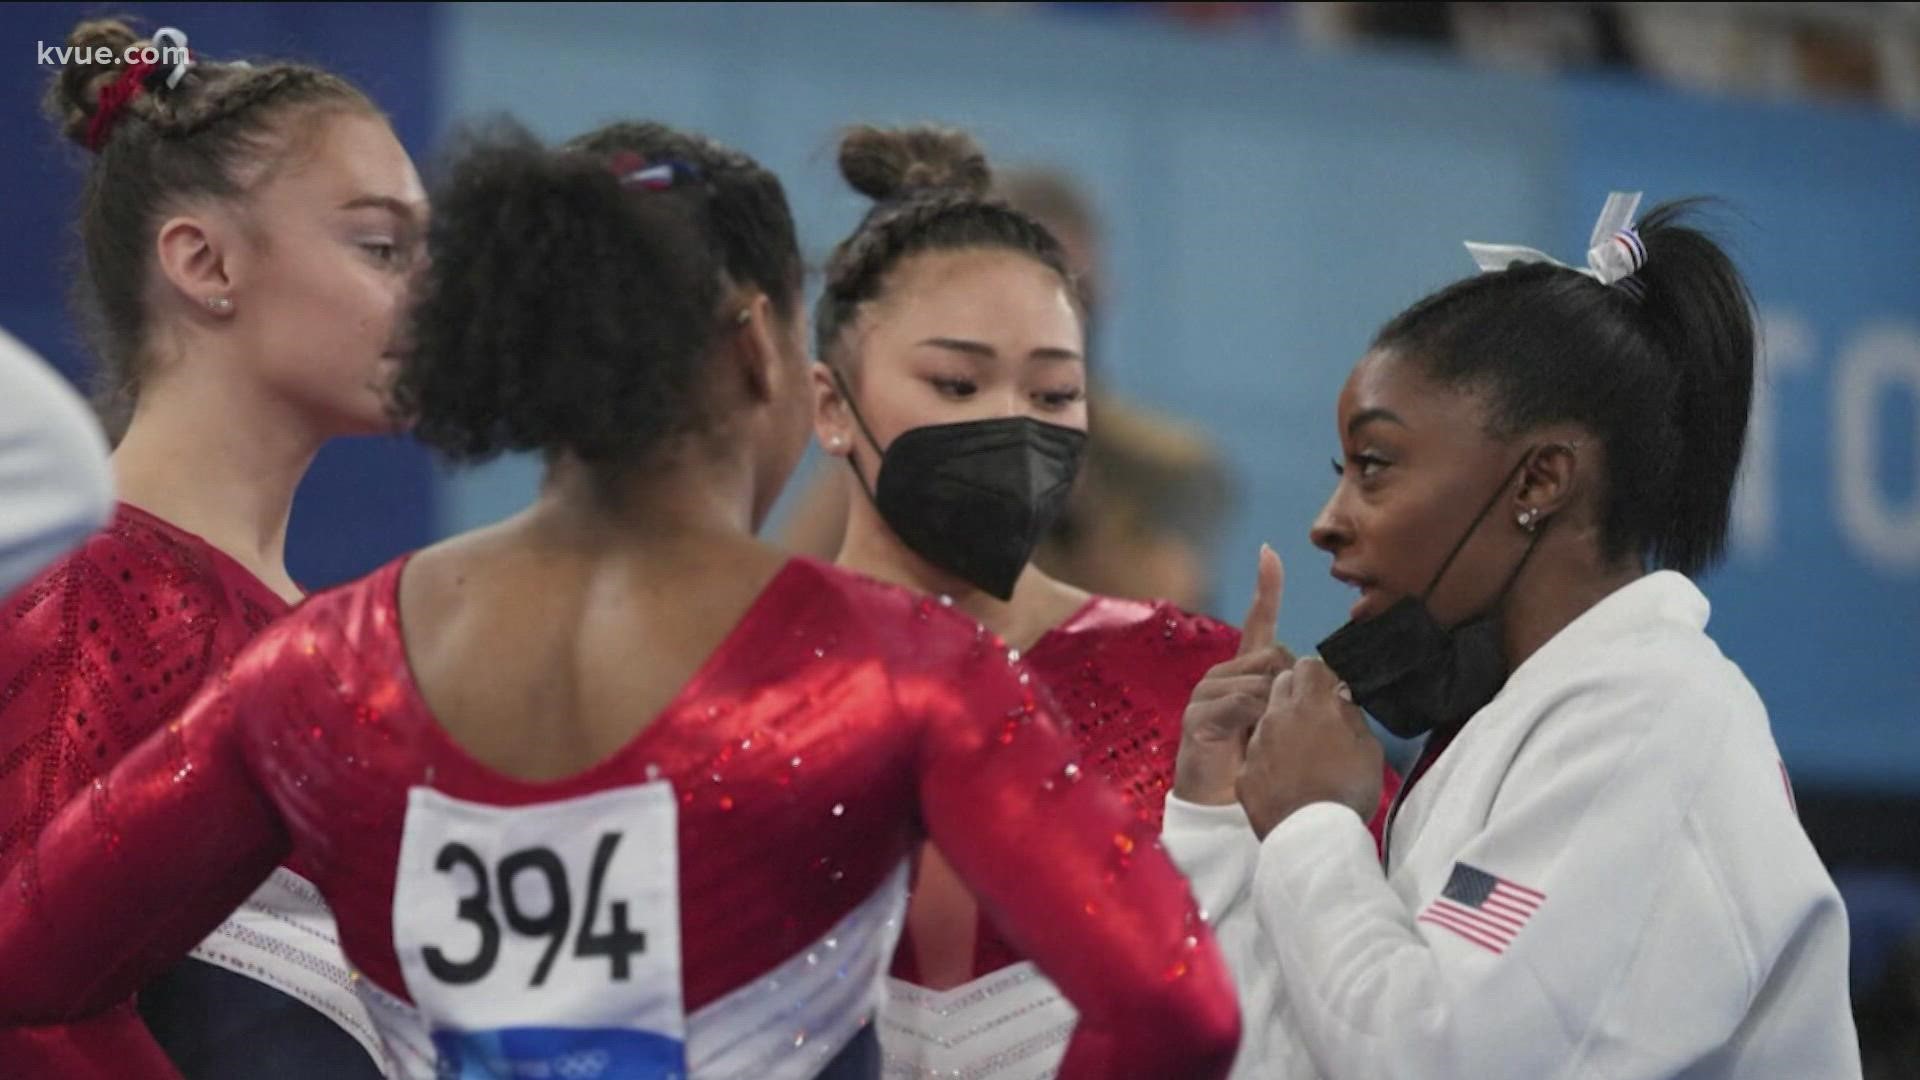 Superstar athletes Simone Biles and Naomi Osaka have recently stepped away from major competitions due to mental health struggles.